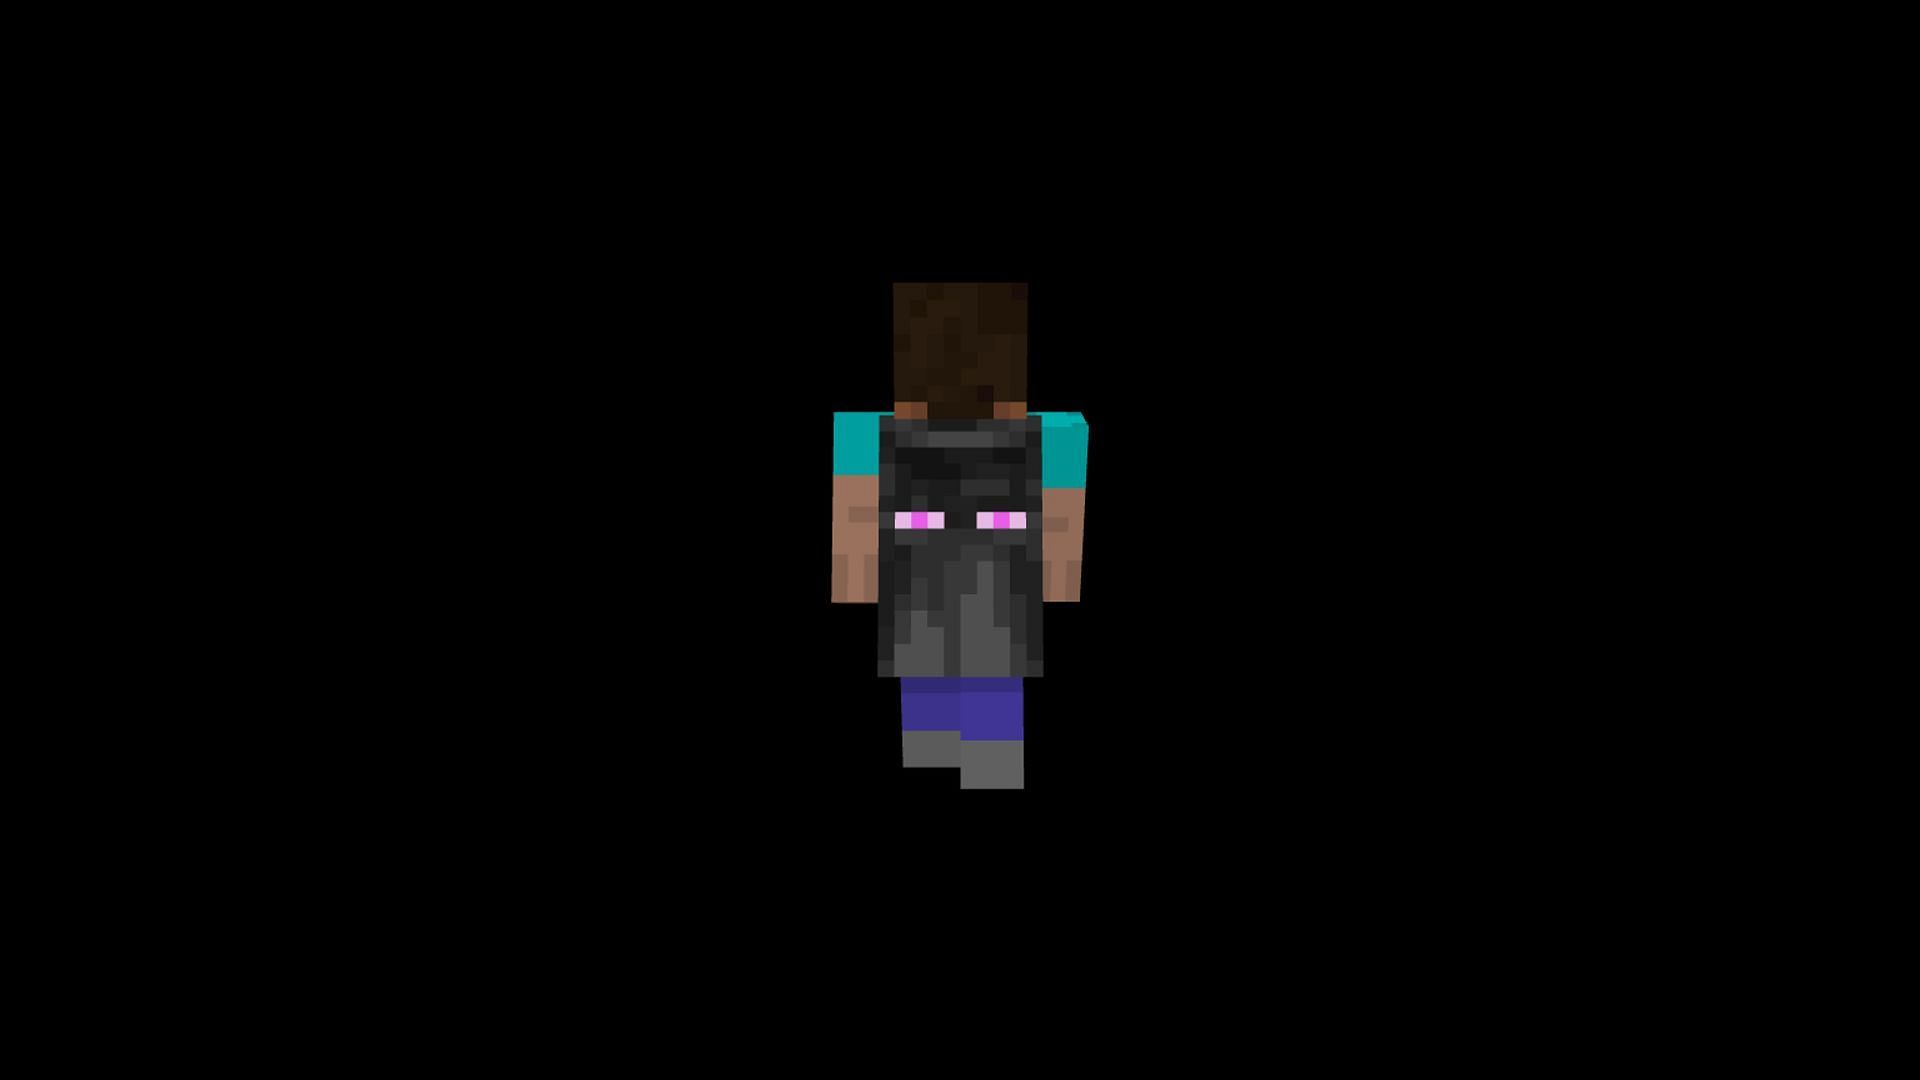 Those who attended Minecon in 2016 received the special Enderman cape (Image via Minecraft Wiki)